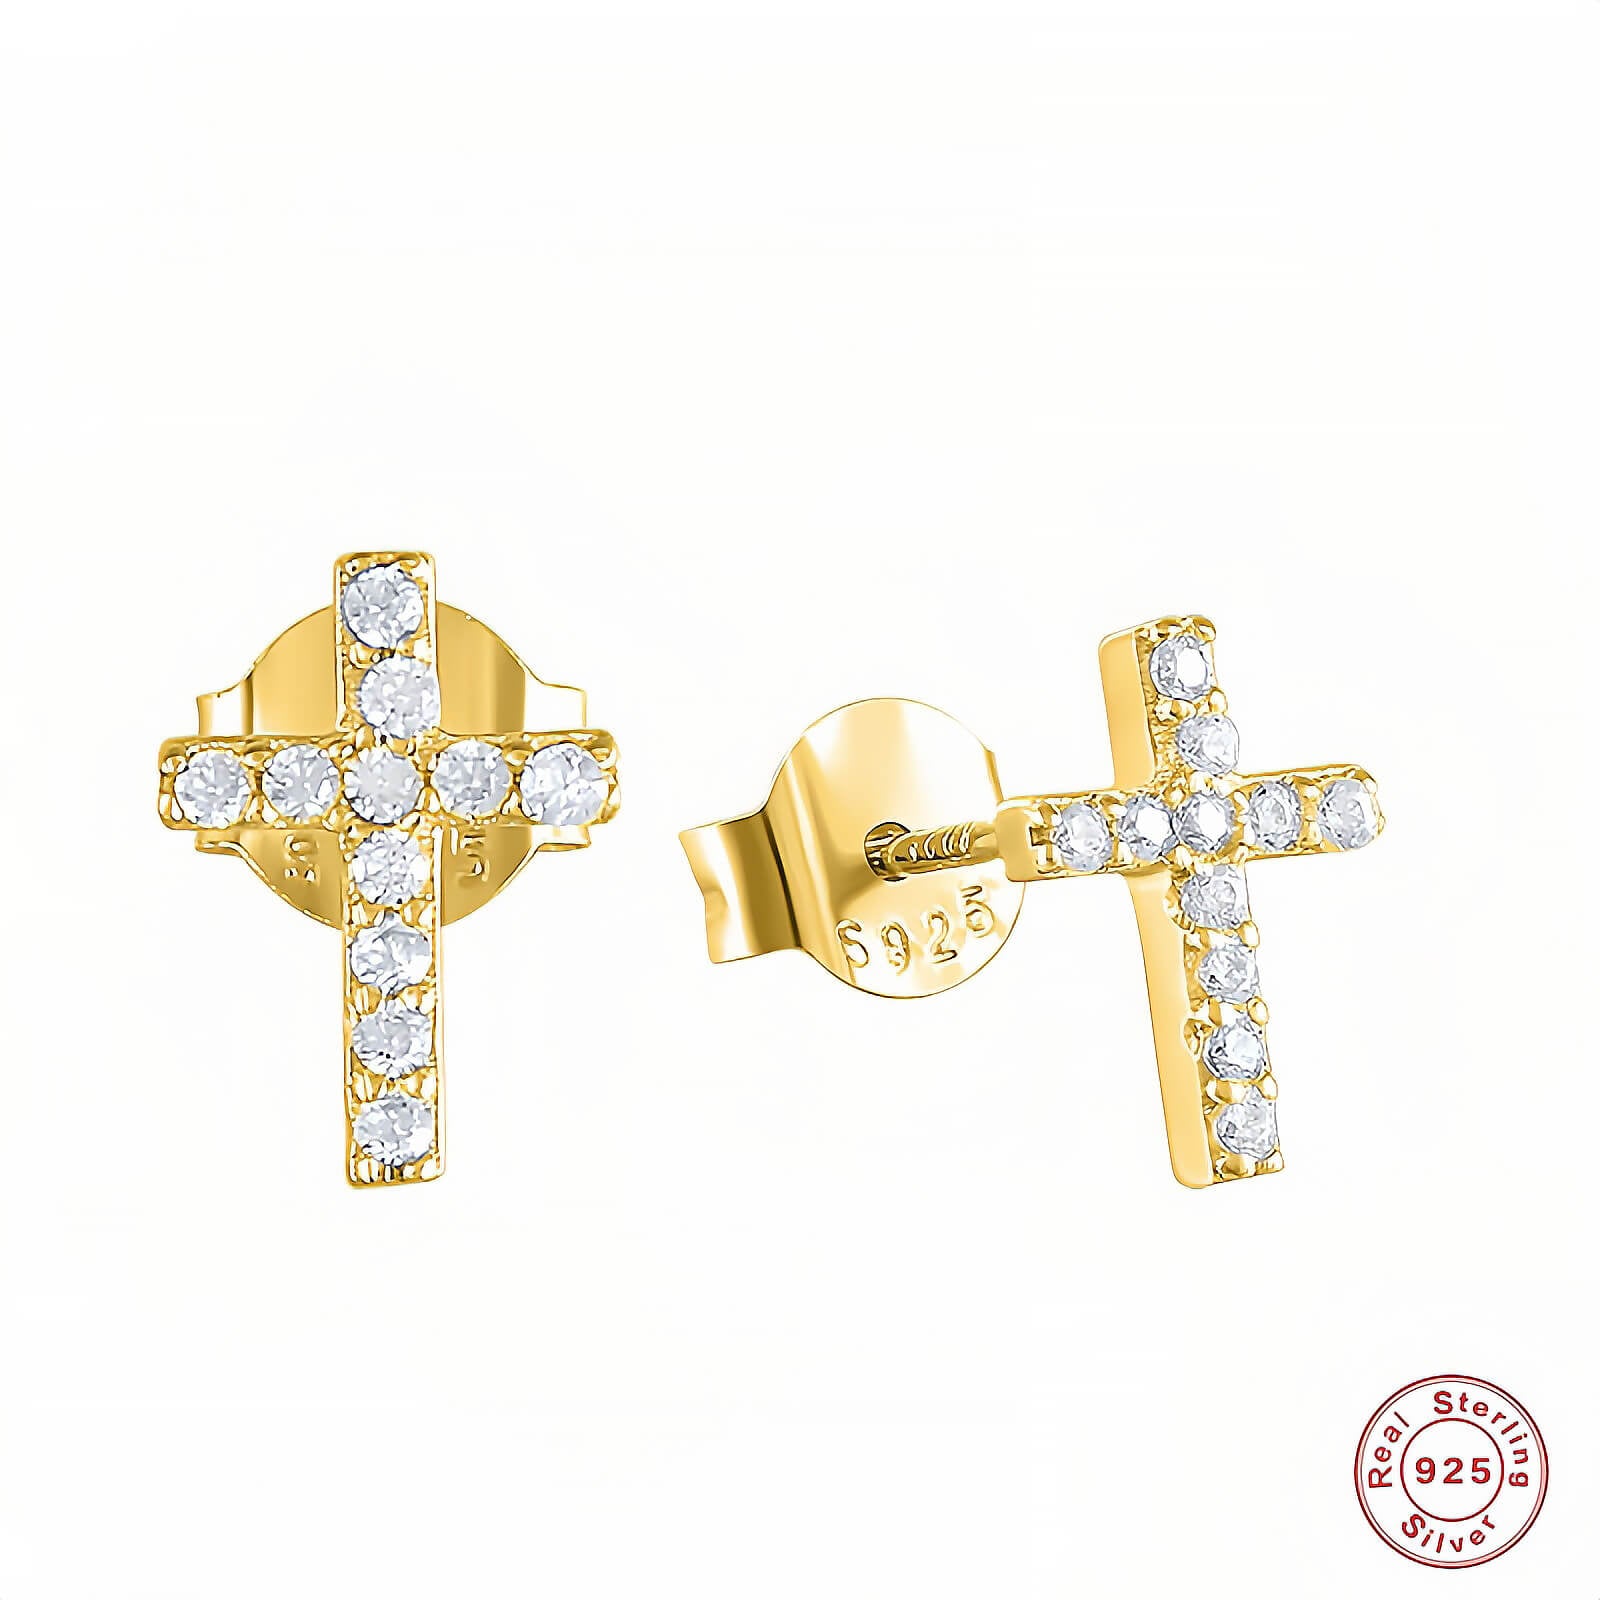 Gold and Crystal Cross Earrings